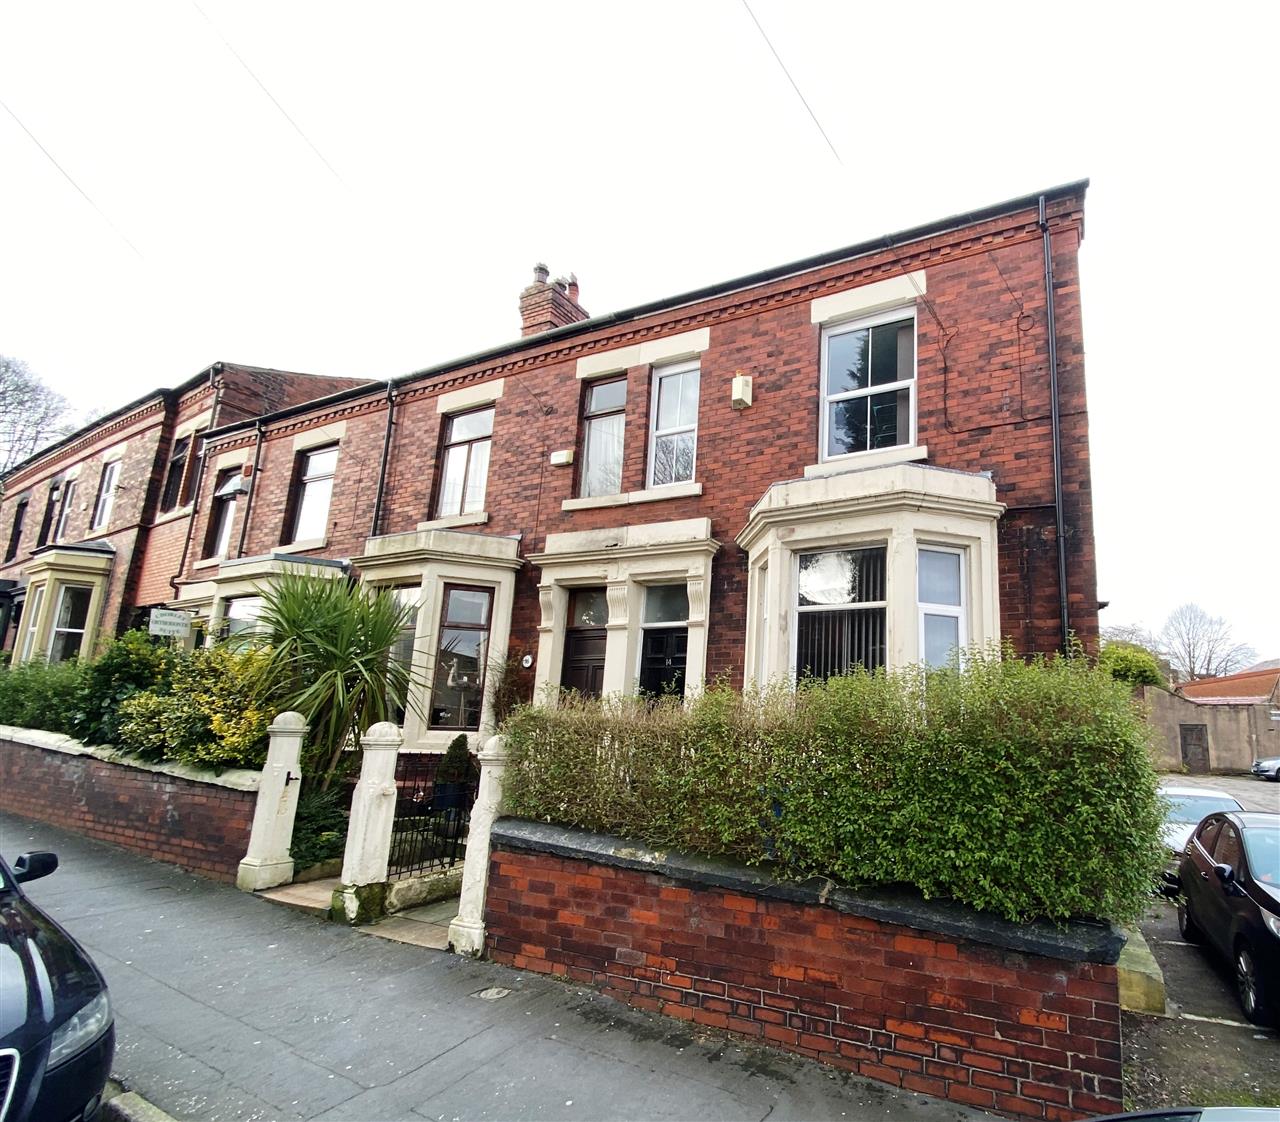 2 bed apartment to rent in A West Street, Chorley, Chorley - Property Image 1